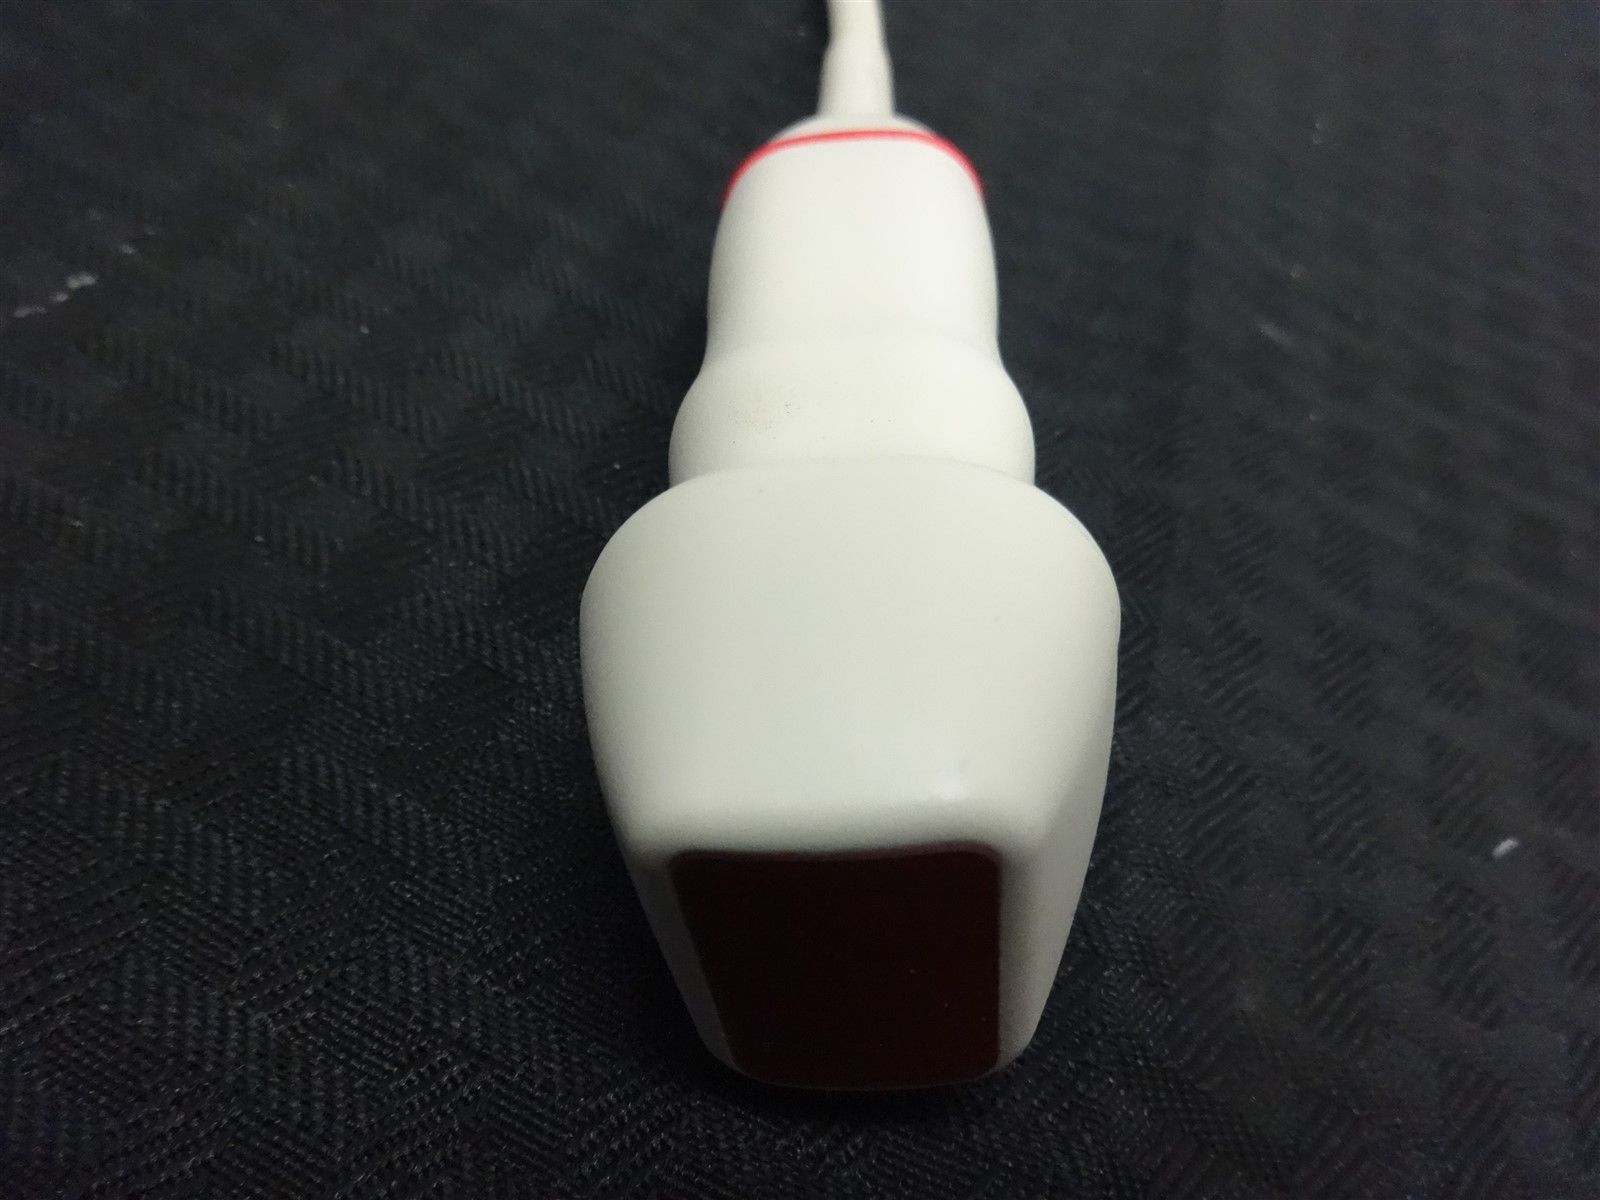 a close up of a white and red object on a black surface